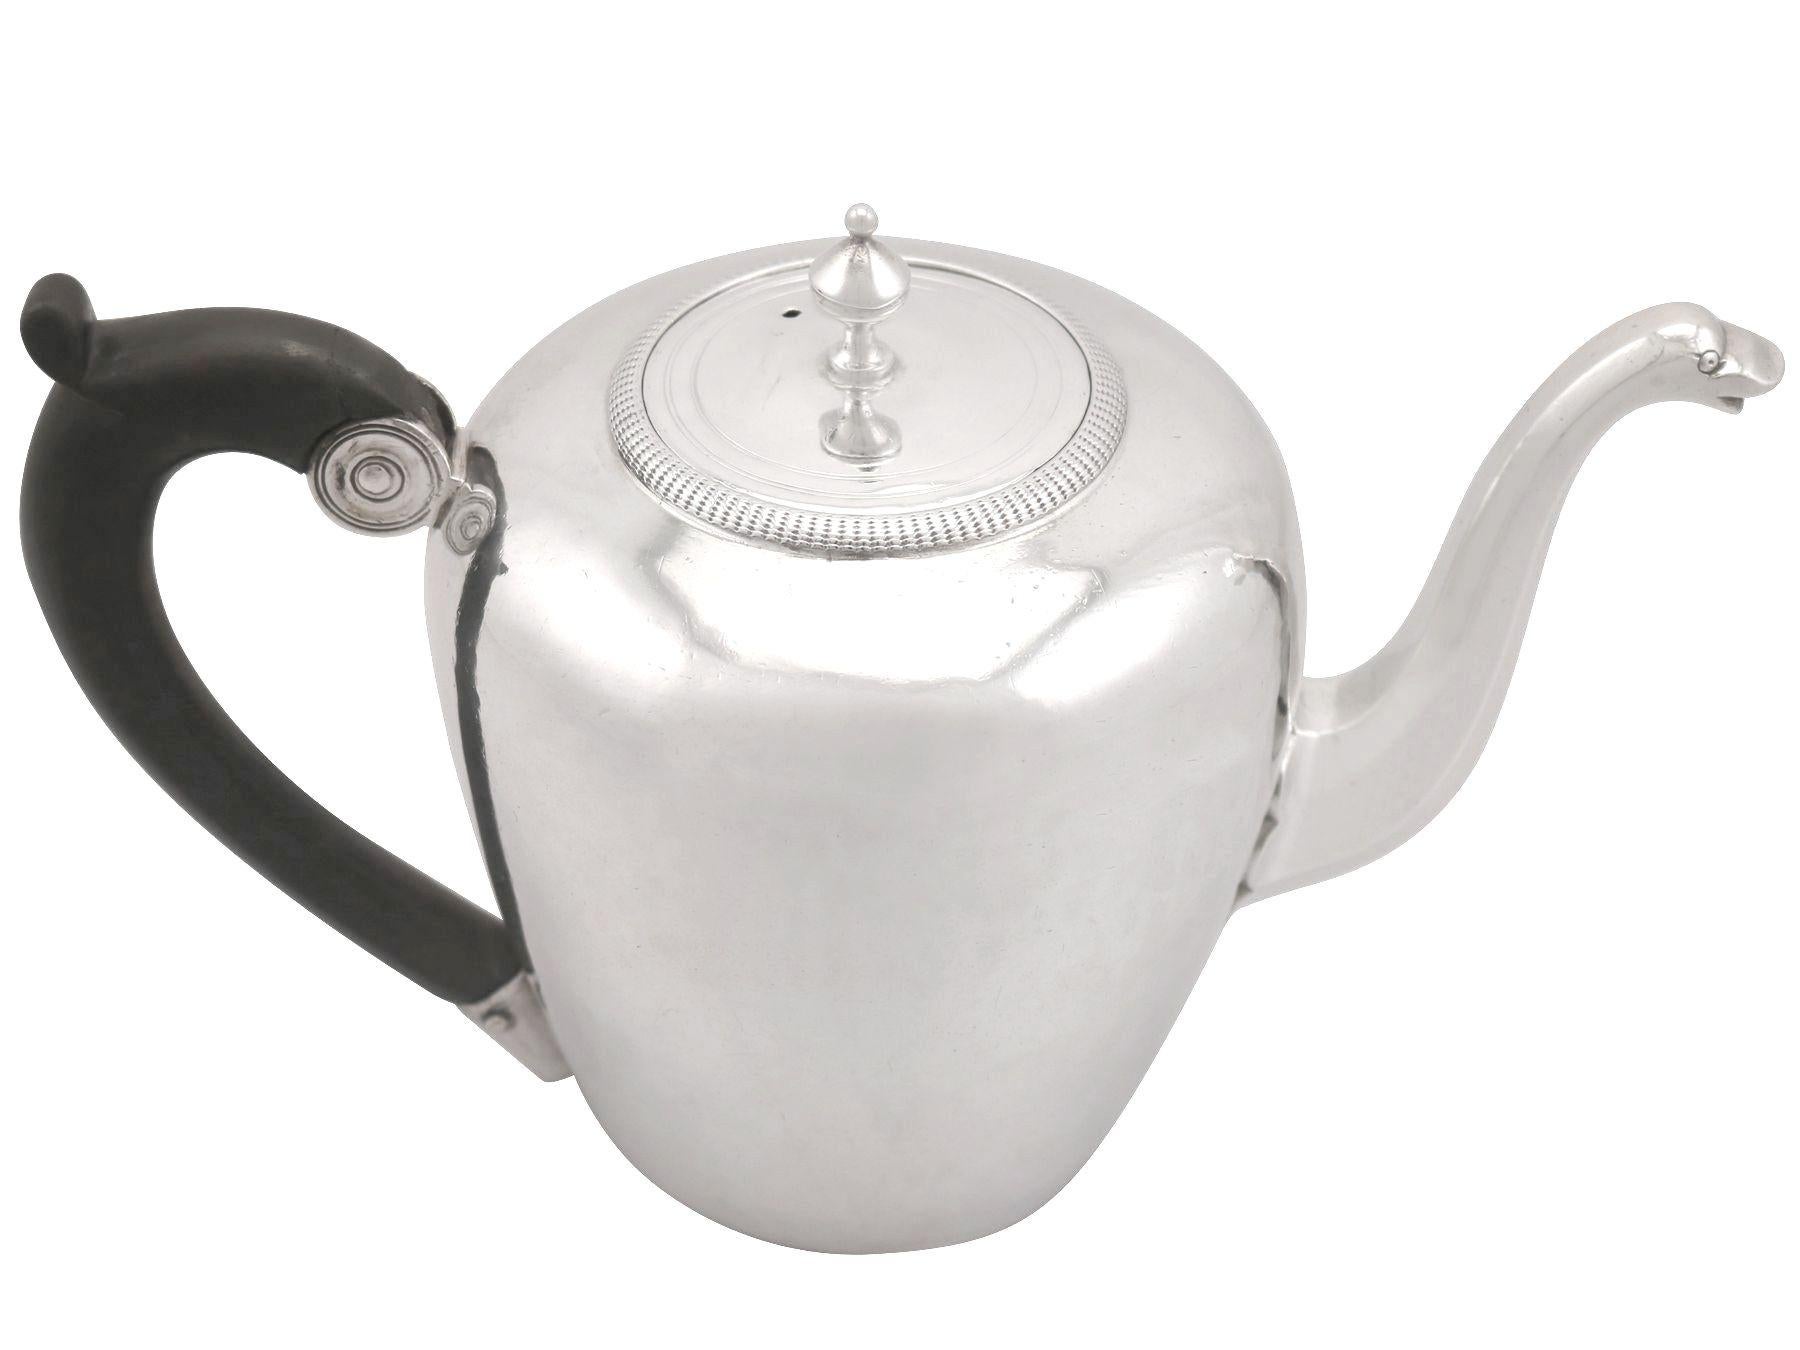 An exceptional, fine and impressive antique French silver teapot; an addition to our silver teaware collection.

This exceptional antique French silver teapot has a circular rounded form.

The surface of the body is plain and unembellished, with